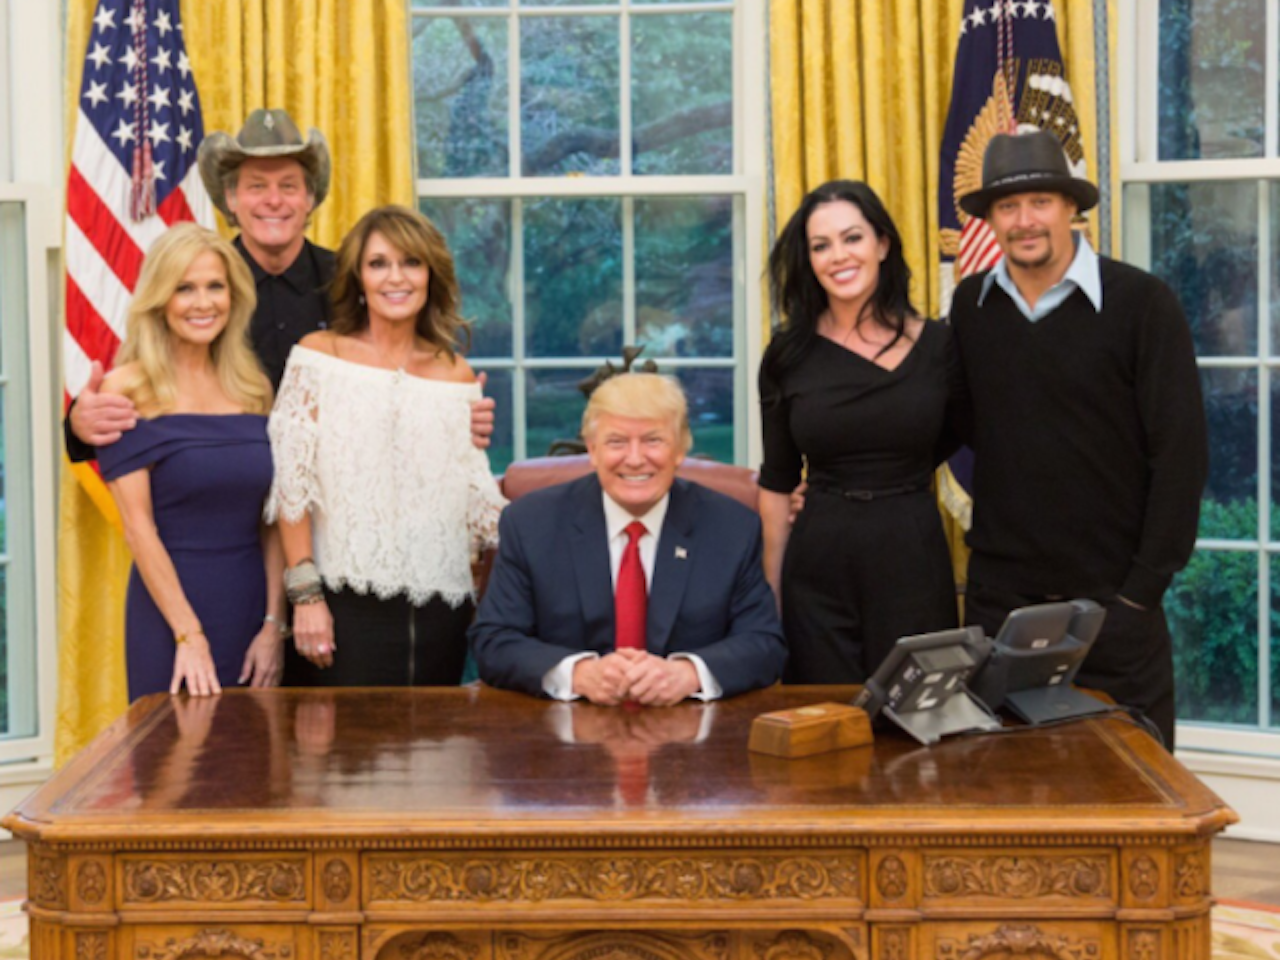 Sarah Palin, Ted Nugent, and Kid Rock pose with Donald Trump in the Oval Office